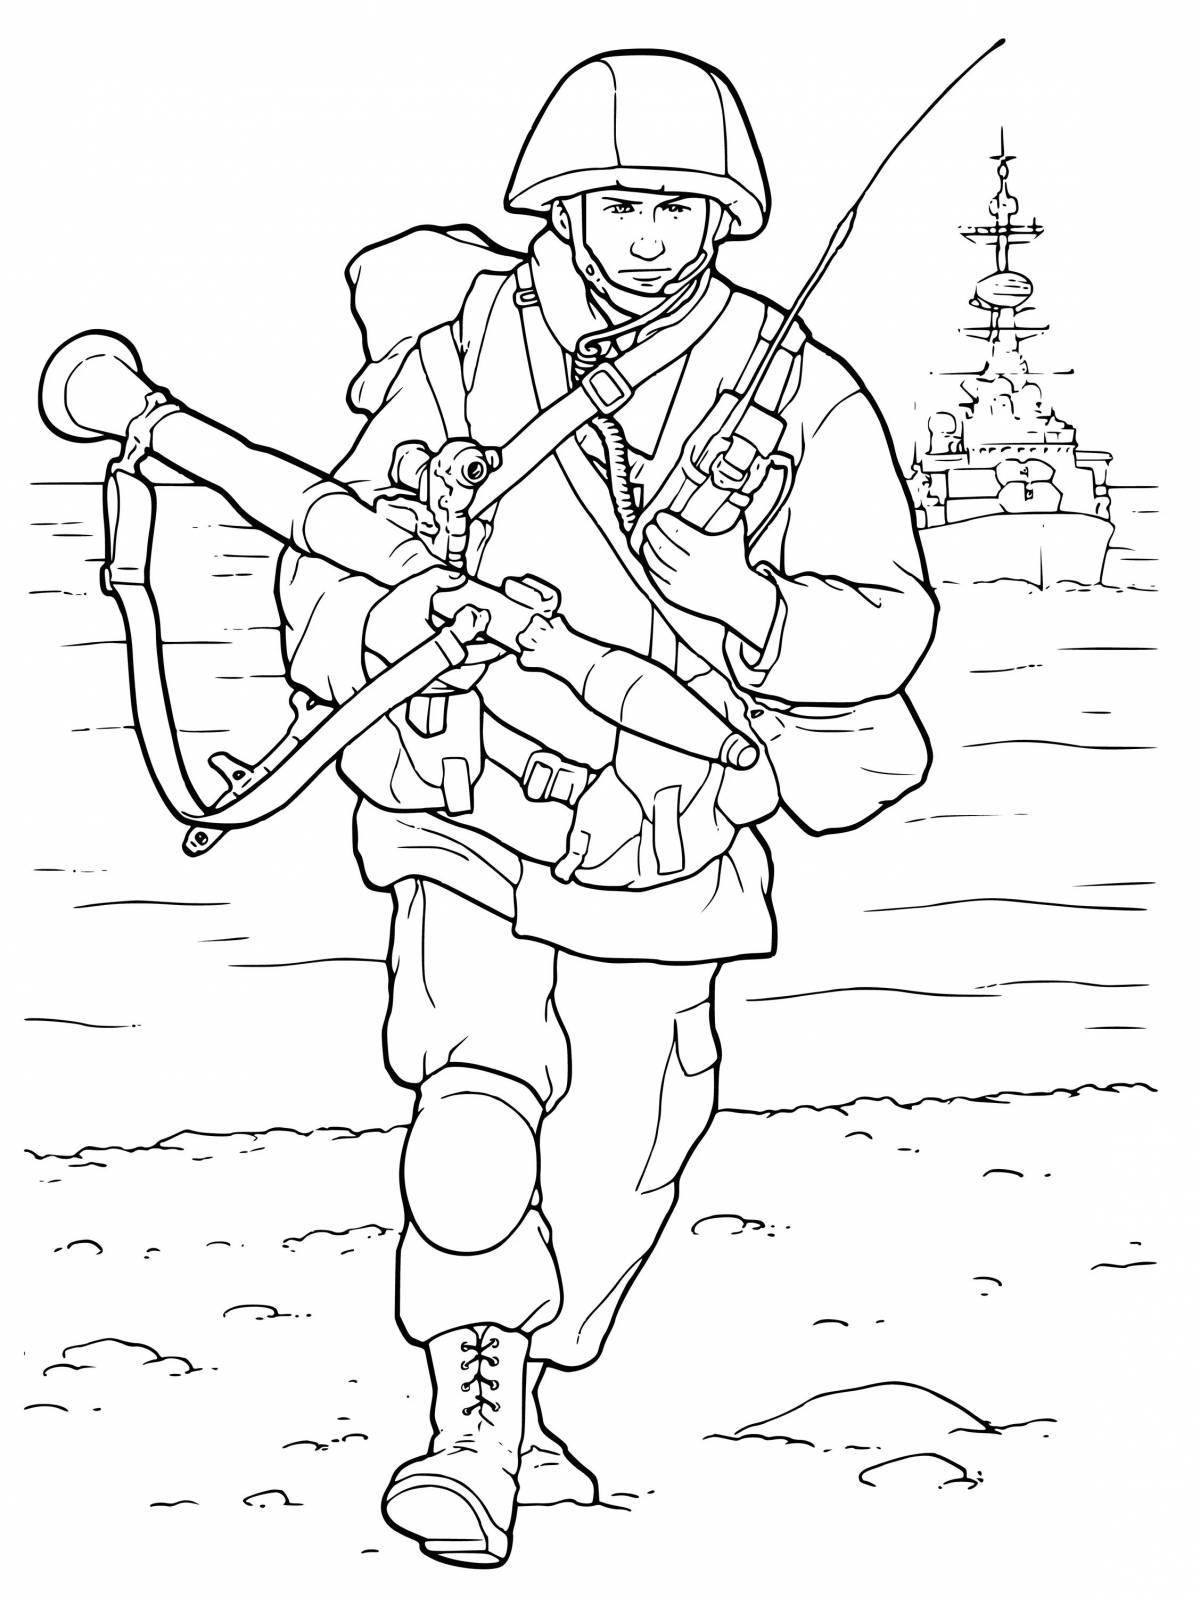 Coloring page stimulated infantry for students